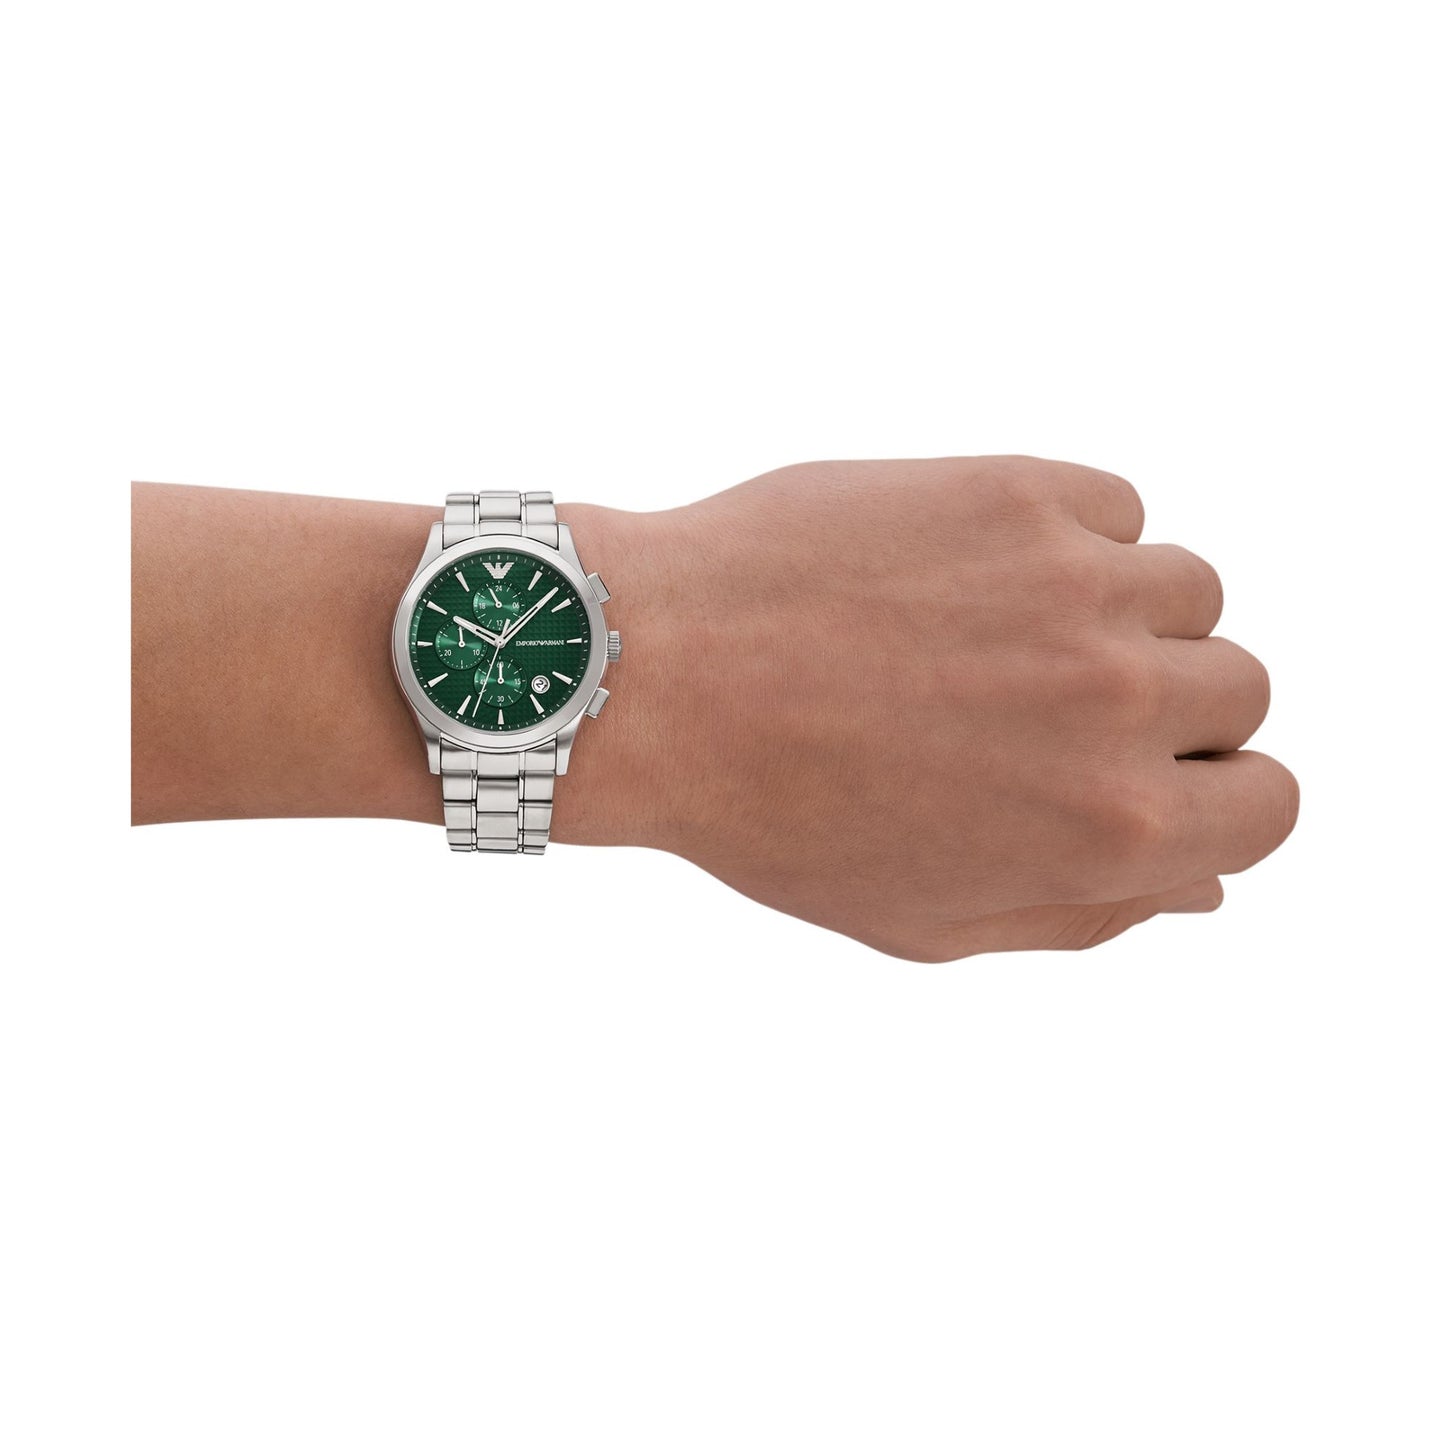 Emporio Armani 42mm Paolo Chronographic Green Dial Watch